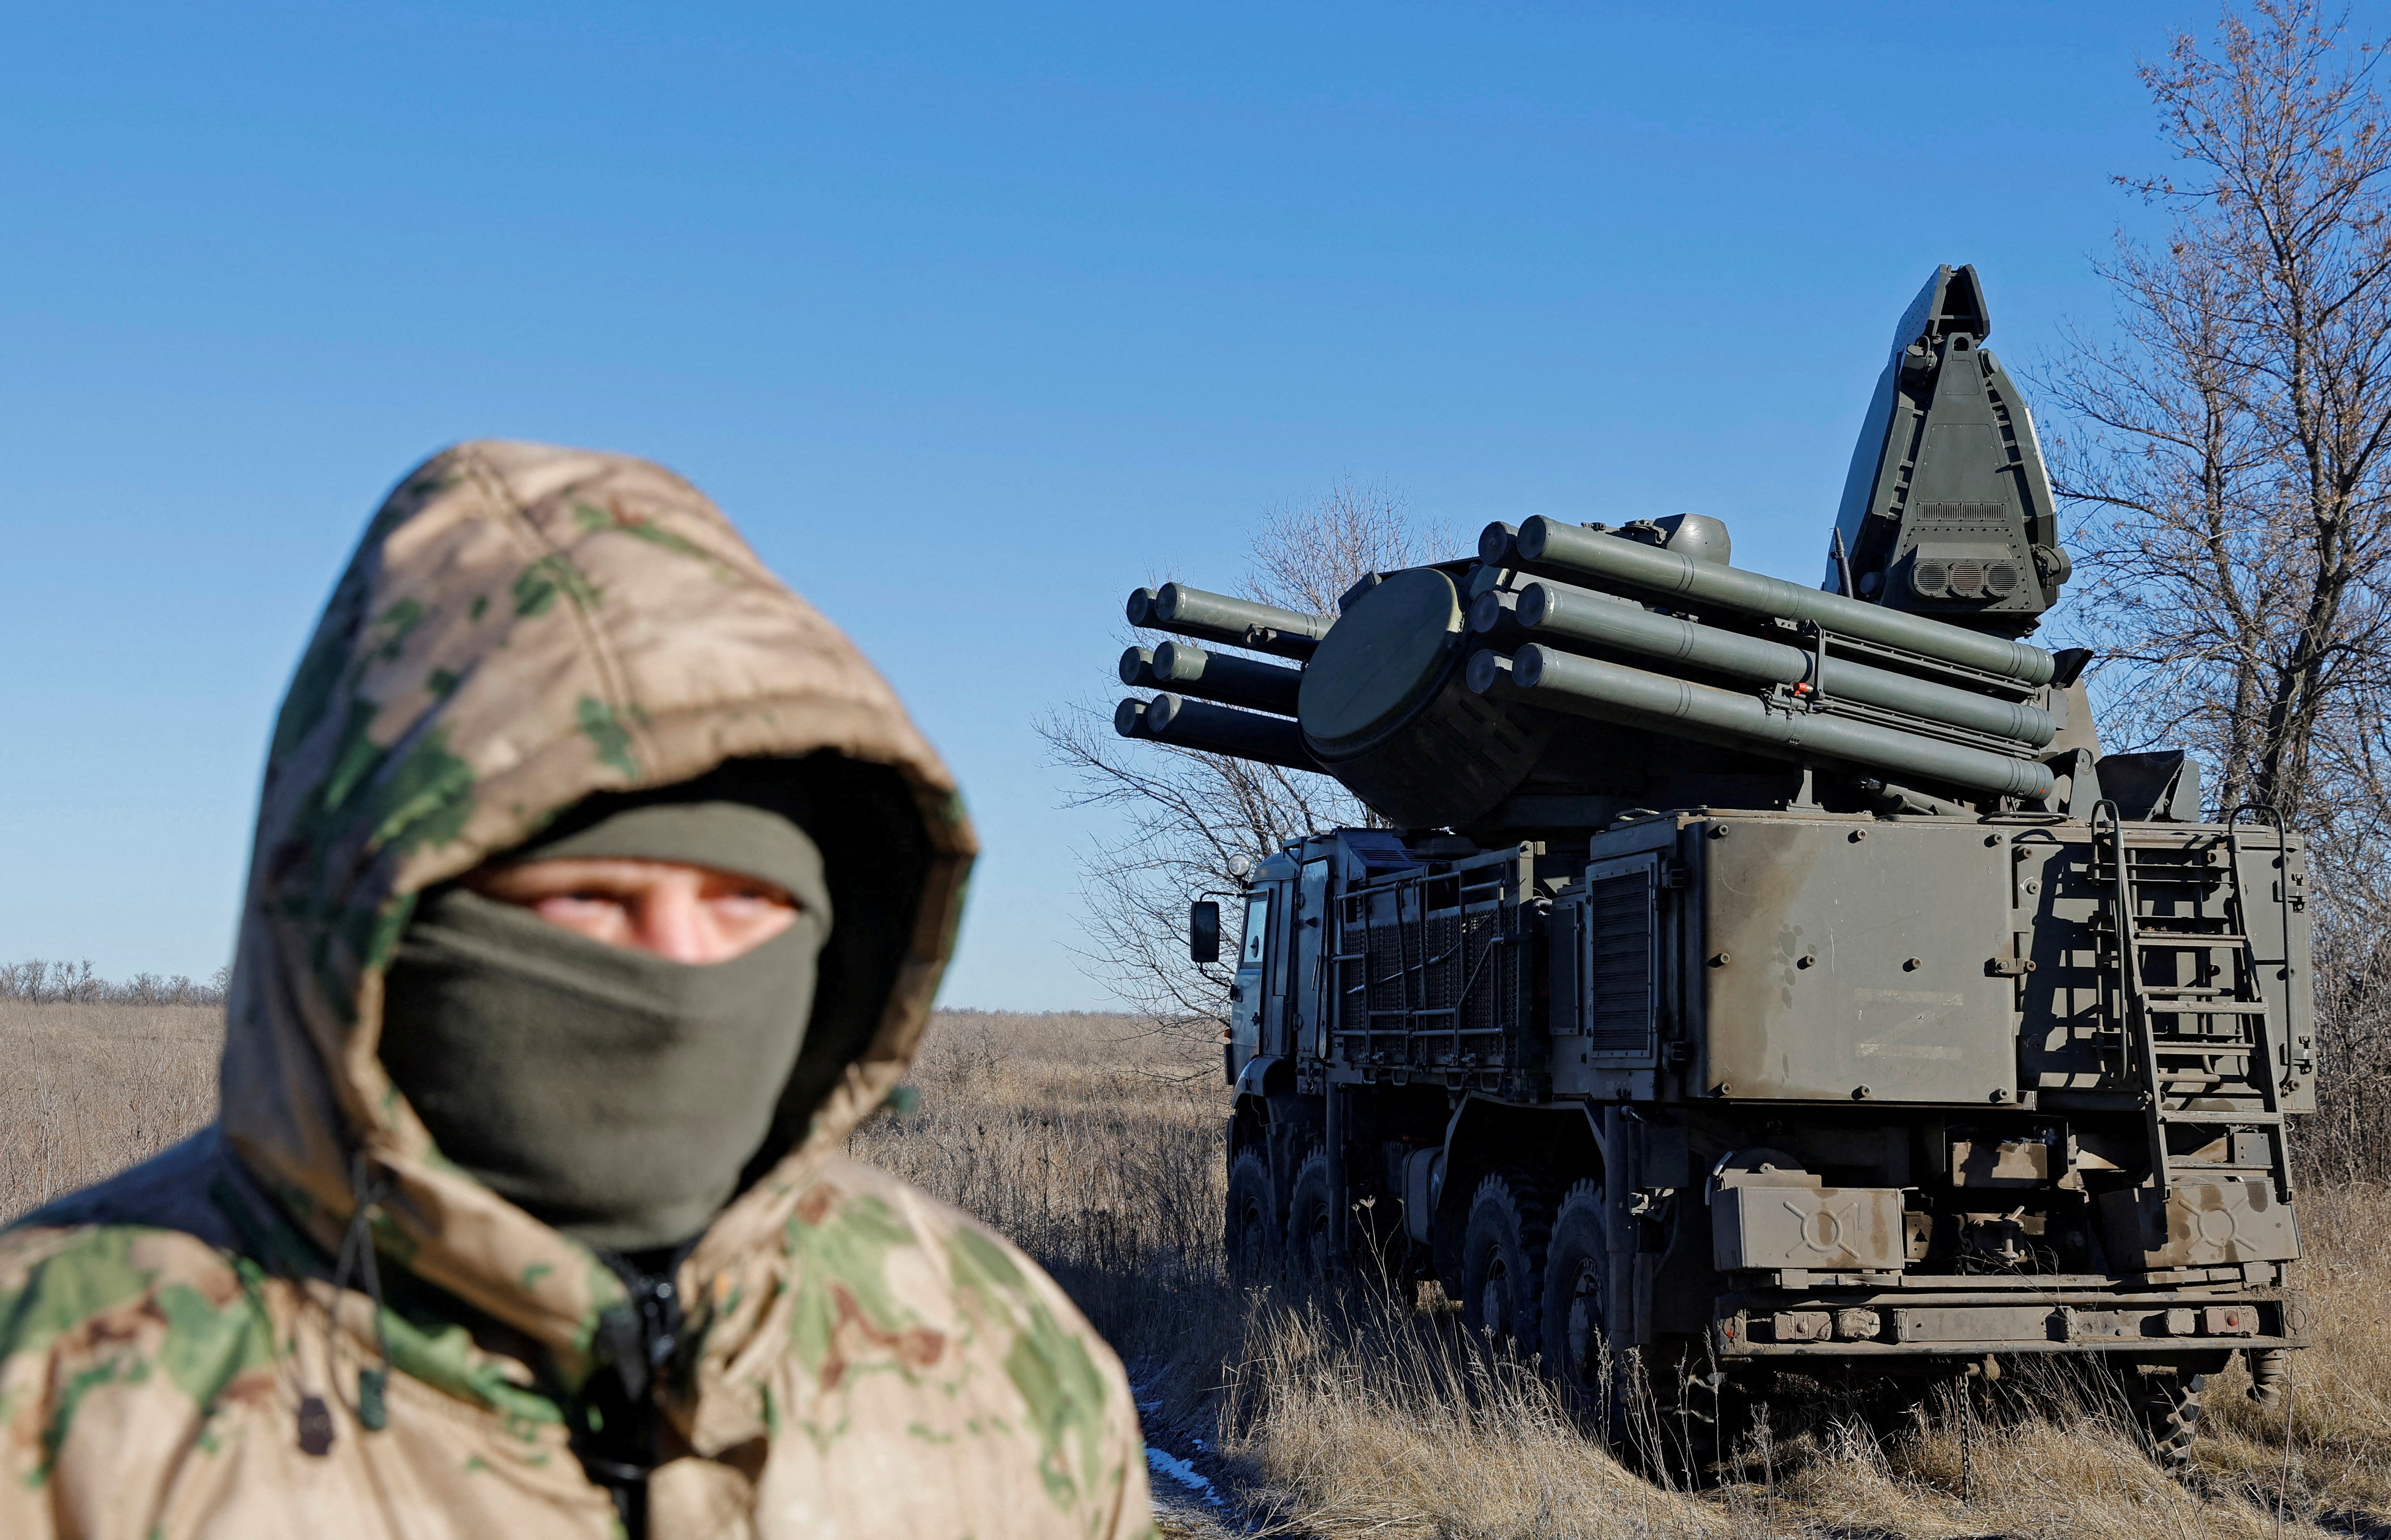 A Russian service member stands in front of a Pantsir anti-aircraft missile system on combat duty in the Luhansk region